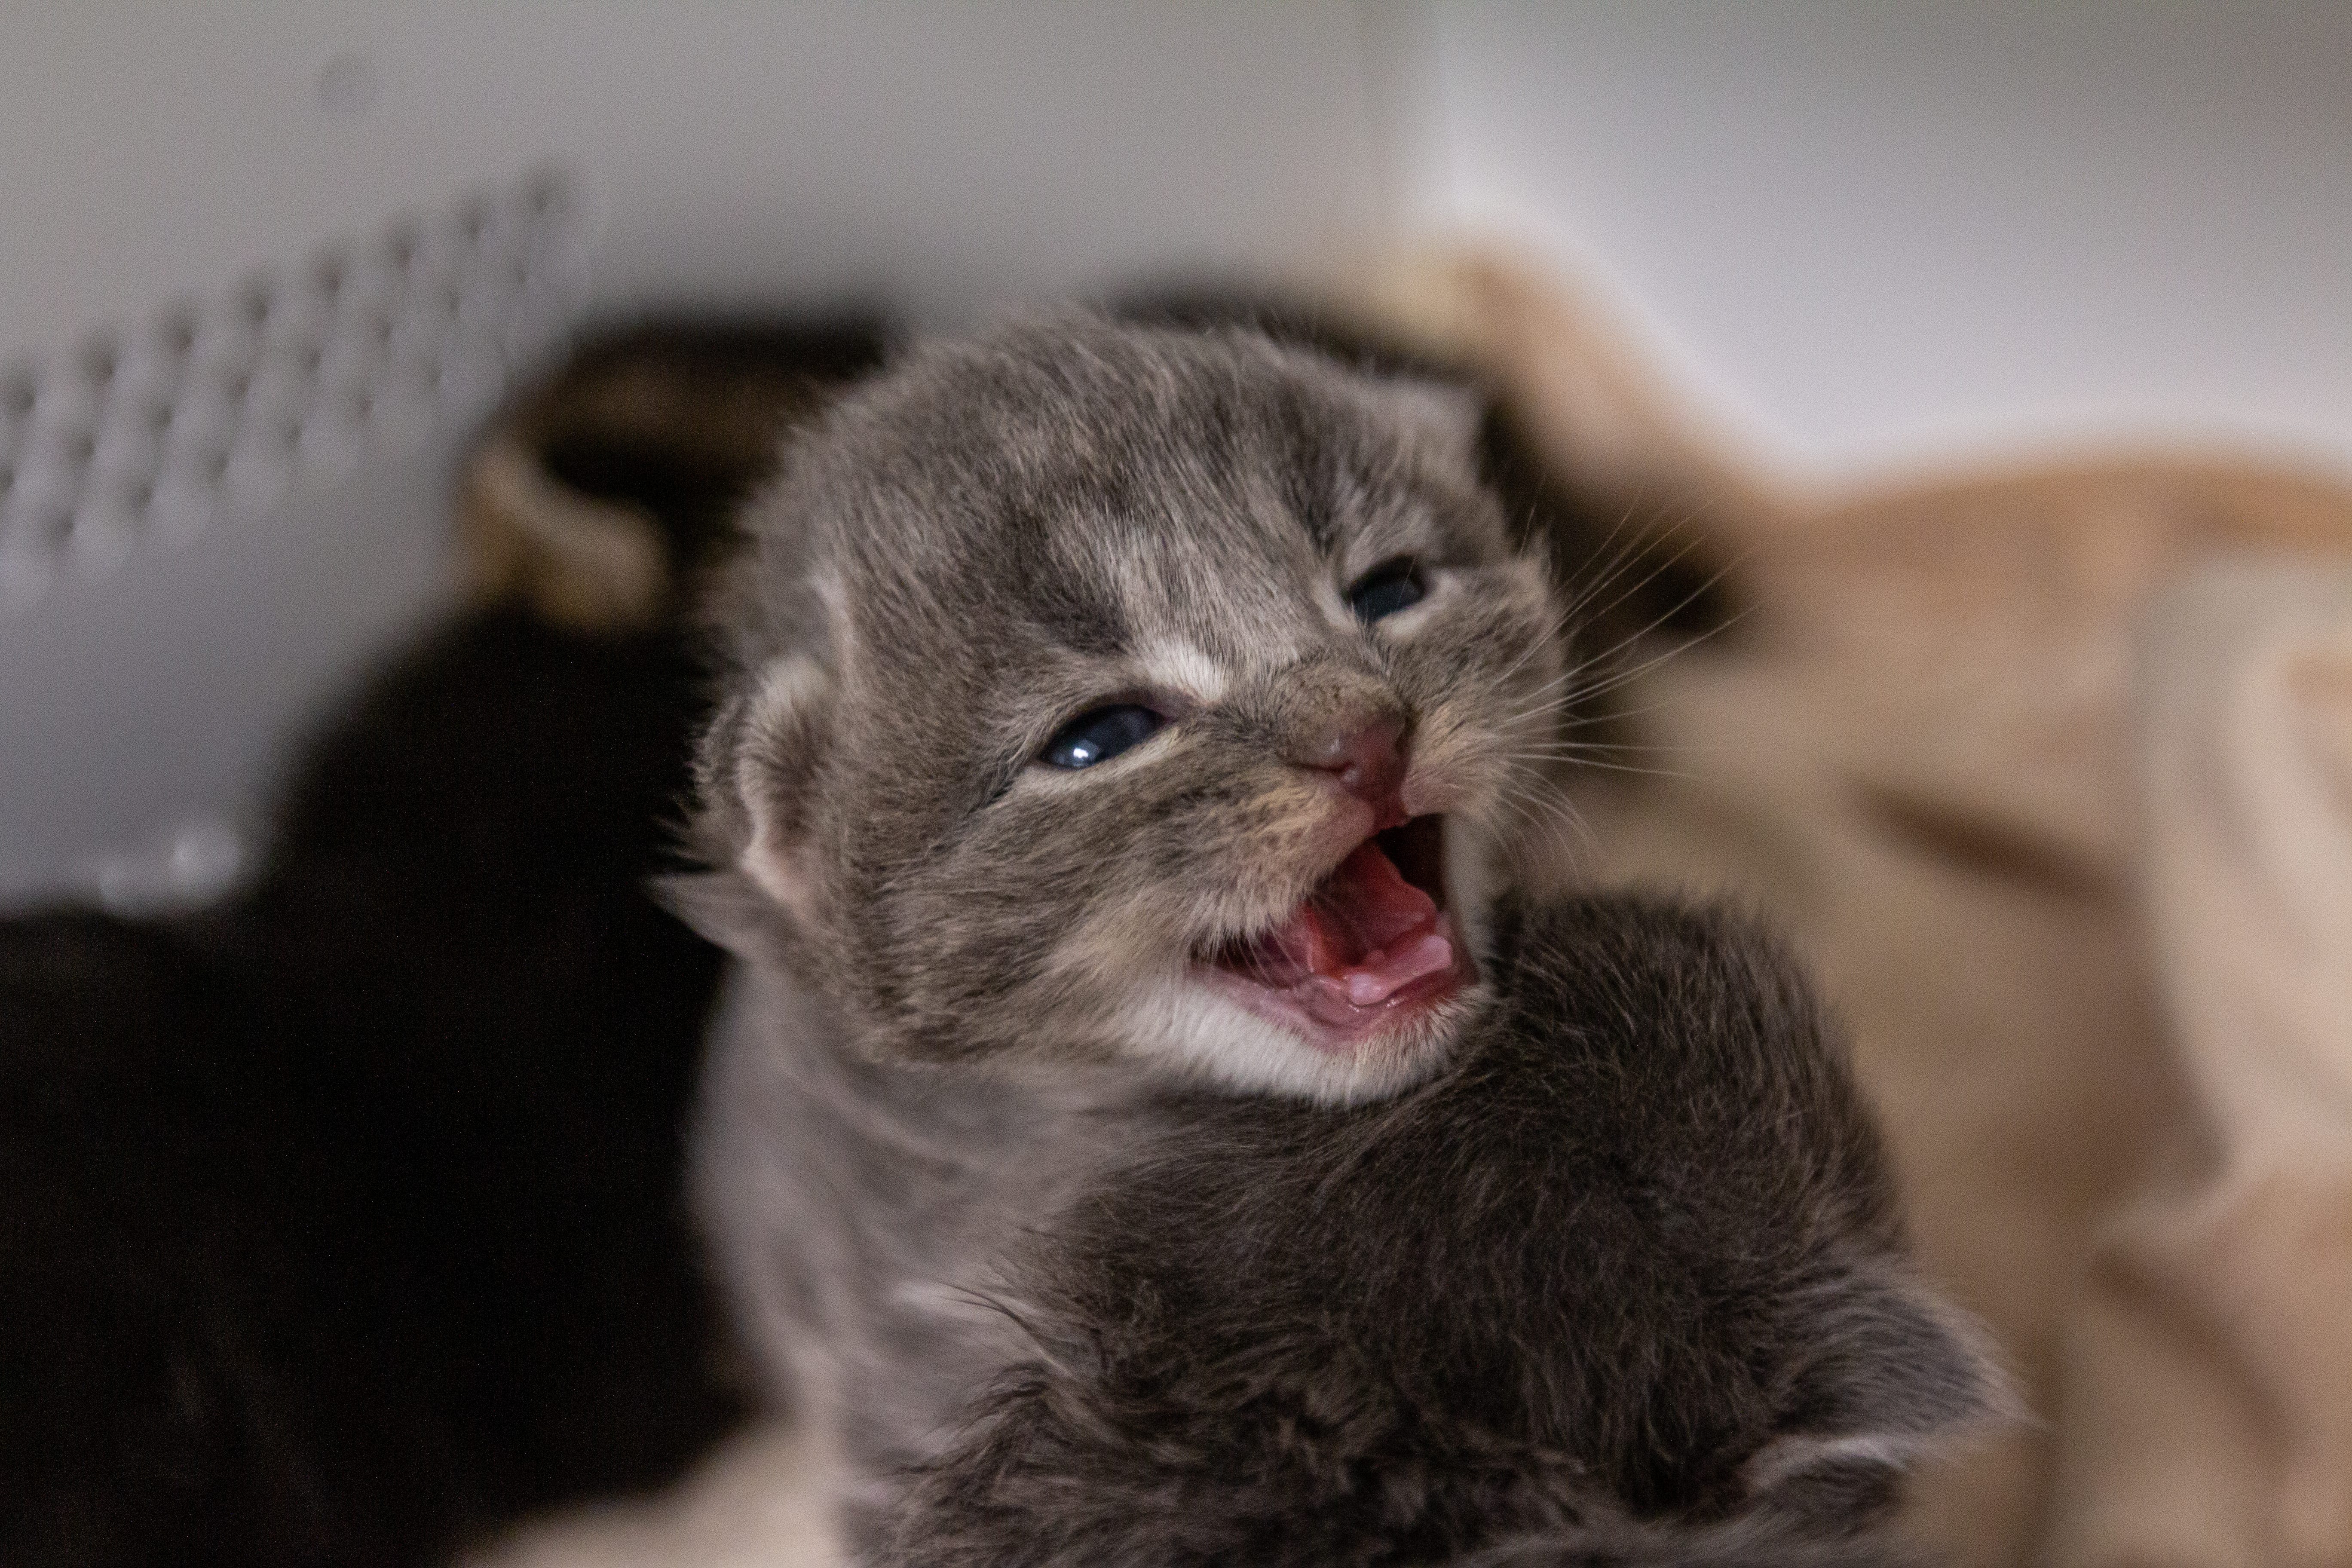 Kitten season is here and it's putting a strain on shelters: How you can help